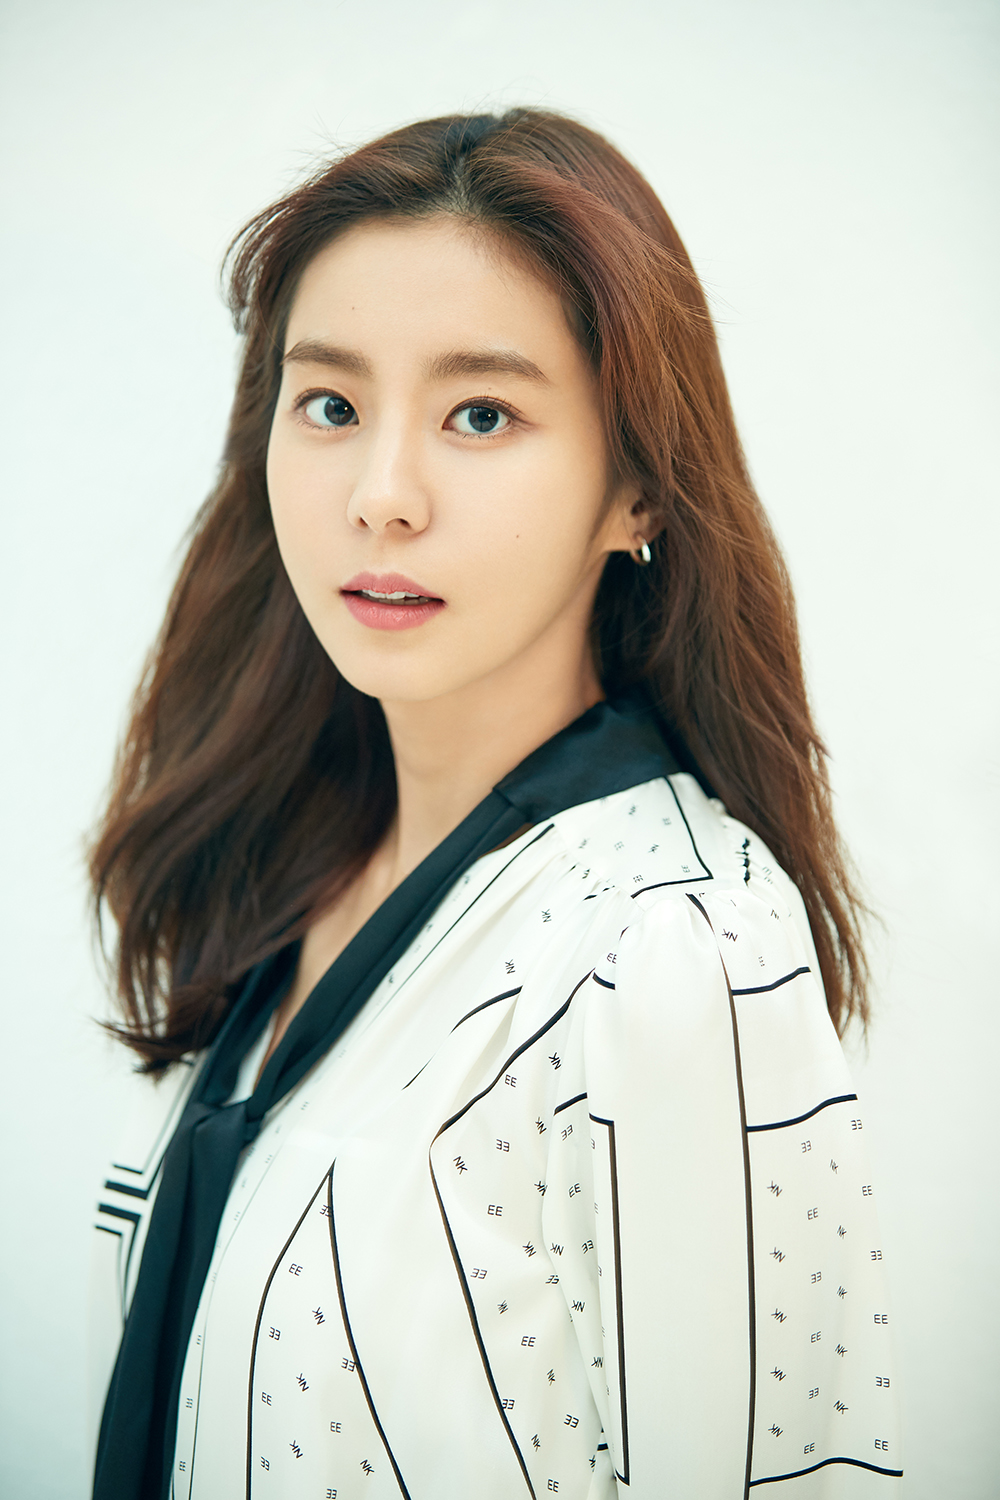 Actor Uee confirmed her appearance as the heroine of the SF8 (SFF Eight) series Kenneth Tsang Kong Pod.SF8, produced by Sufilm in cooperation with MBC, the Korean Film Directors Association (DGK), and wave, is a story of humans dreaming of a complete society through technological development in the near future. It is a Korean version of the OLizynal SF Anthology series.Uee will co-work with Choi Siwon in the role of Support, the heroine of Kenneth Tsang Kong Pod directed by Oh Ki-hwan.Kenneth Tsang Kong Pod is a romantic comedy that depicts the process of men and women who meet through VR (virtual reality) making love even in real life.Uee received a favorable reception with the audiences hot love through KBS2 One Only My Kim Doran, which was popular in March last year, and won the Womens Excellence Prize in the feature drama category of 2018 KBS Acting.Recently, Channel A entertainment show Airplane Ride 2, which contains crew challengers, has captivated viewers with its frank personality and charm of the beauty of the eight.Uee, who has been receiving a good response with his acting ability and beauty, is expected to attract viewers with what charm he will attract in the romantic comedy Kenneth Tsang Kong Pod which is a fresh material called virtual reality.Meanwhile, SF8 will be released on the wave in July, and the OLizynal version will be broadcast on MBC TV in August next month for two weeks over four weeks.